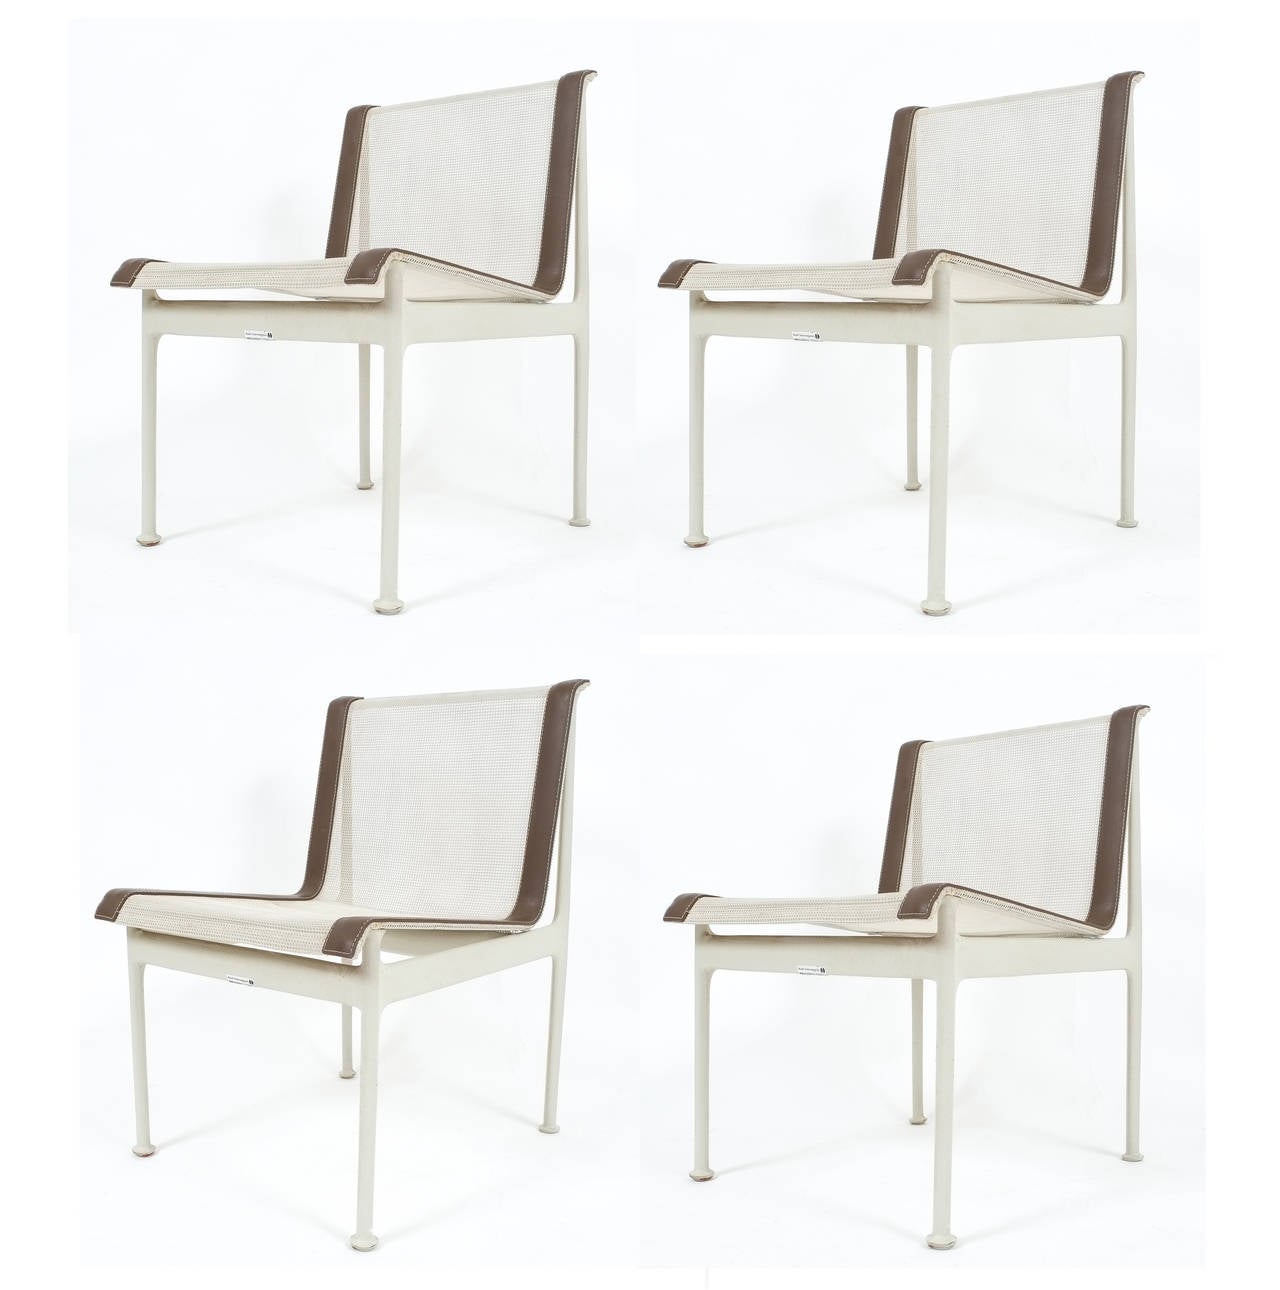 Nice set of four hard to find Richard Schultz outdoor or indoor lounge chairs for Knoll 1966. The set includes four chairs, with white mesh seats and brown trim. The condition is good, some minor wear to the lacquered cast bases. 